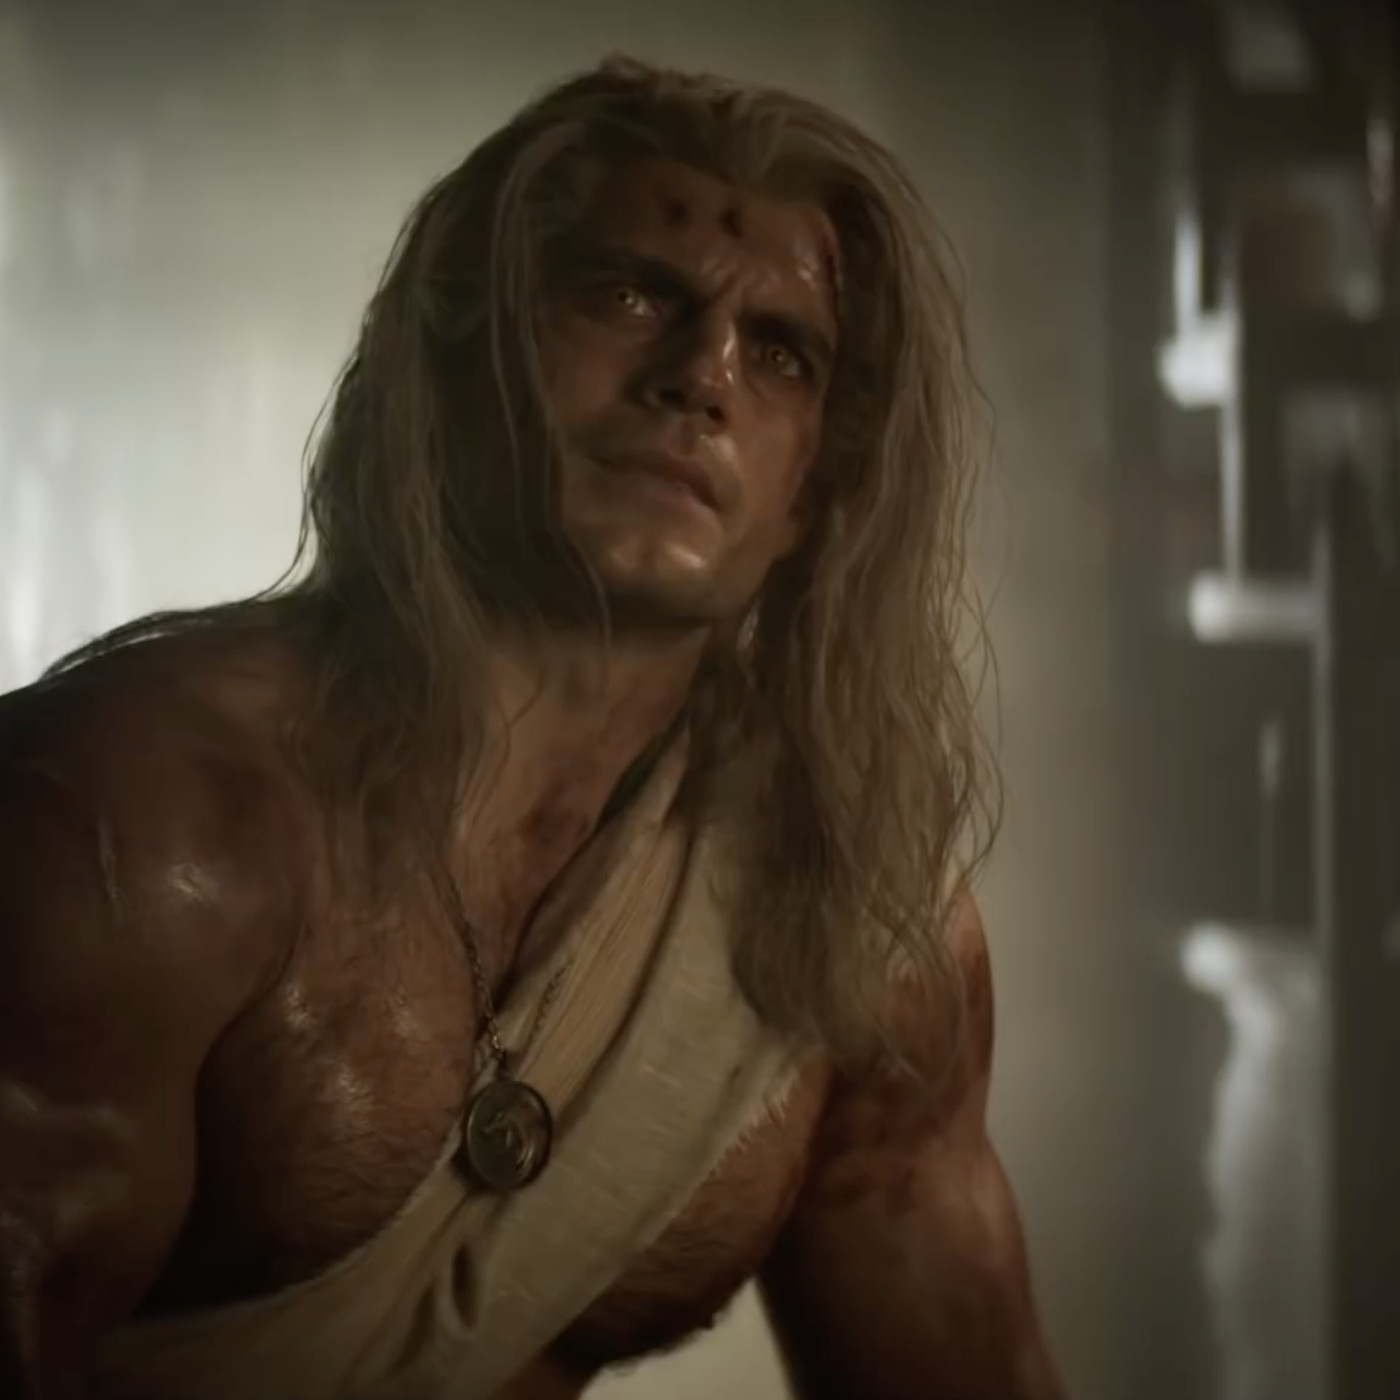 It turns out that ”The Witcher” is a show based on a video game. Heh